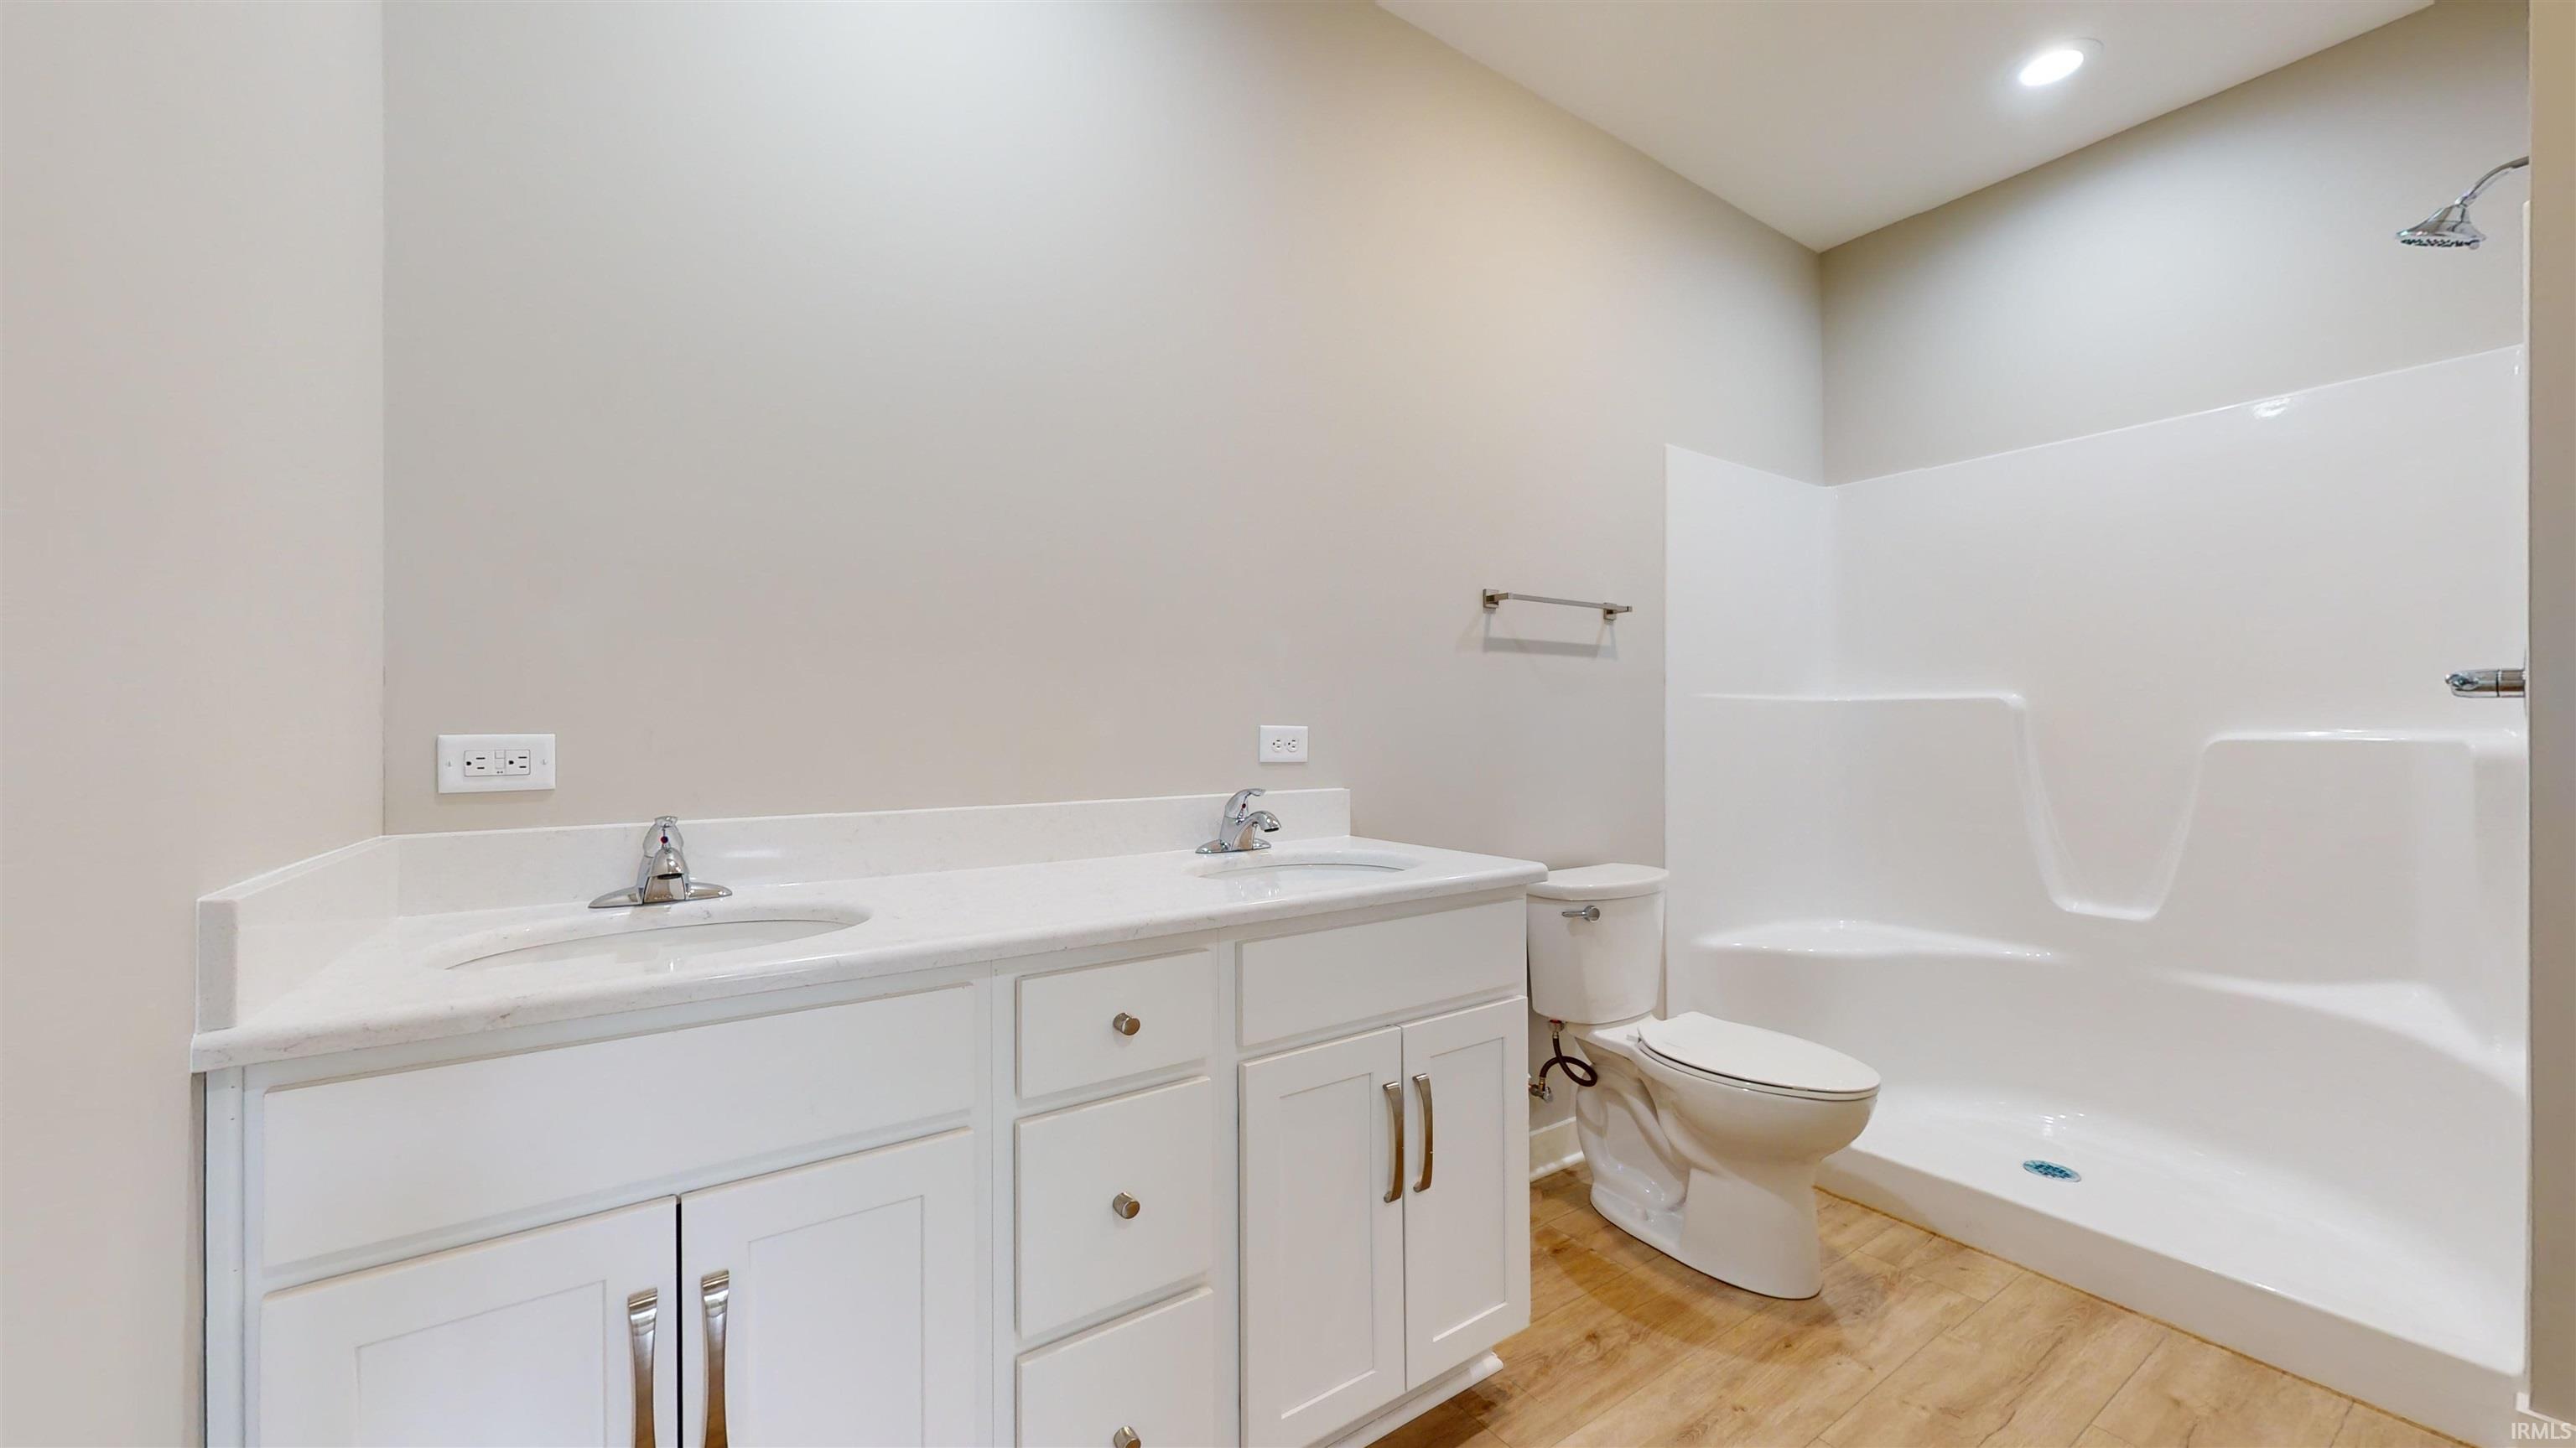 Features a walk-in-closet with custom wood shelving, a step-in shower, & a double vanity.